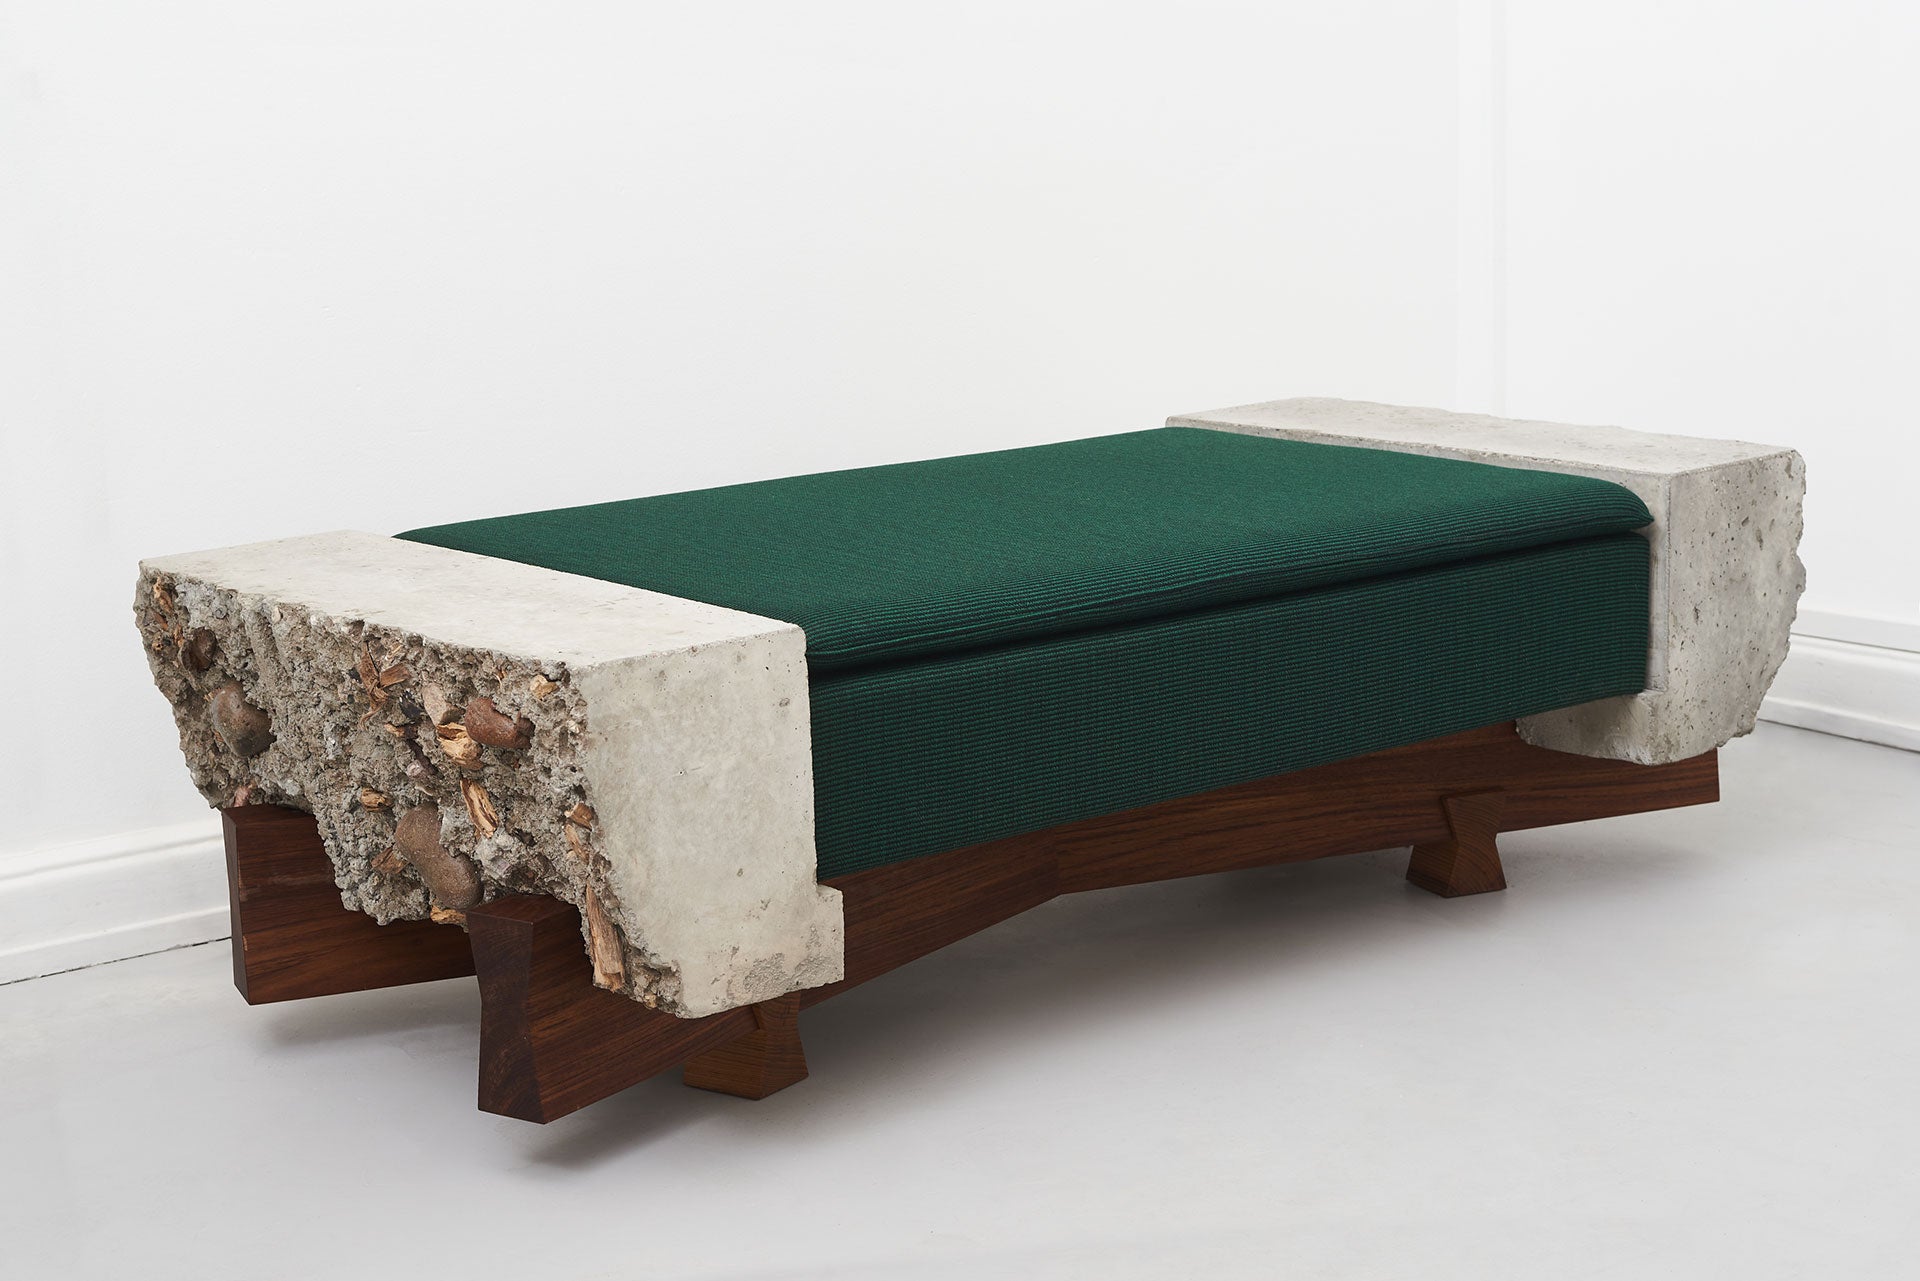 X-Bench Petit/ FOS, 2018/ Cast concrete with branches and stones, oiled wood base, seating upholstery/ Courtesy of FOS and Etage Projects